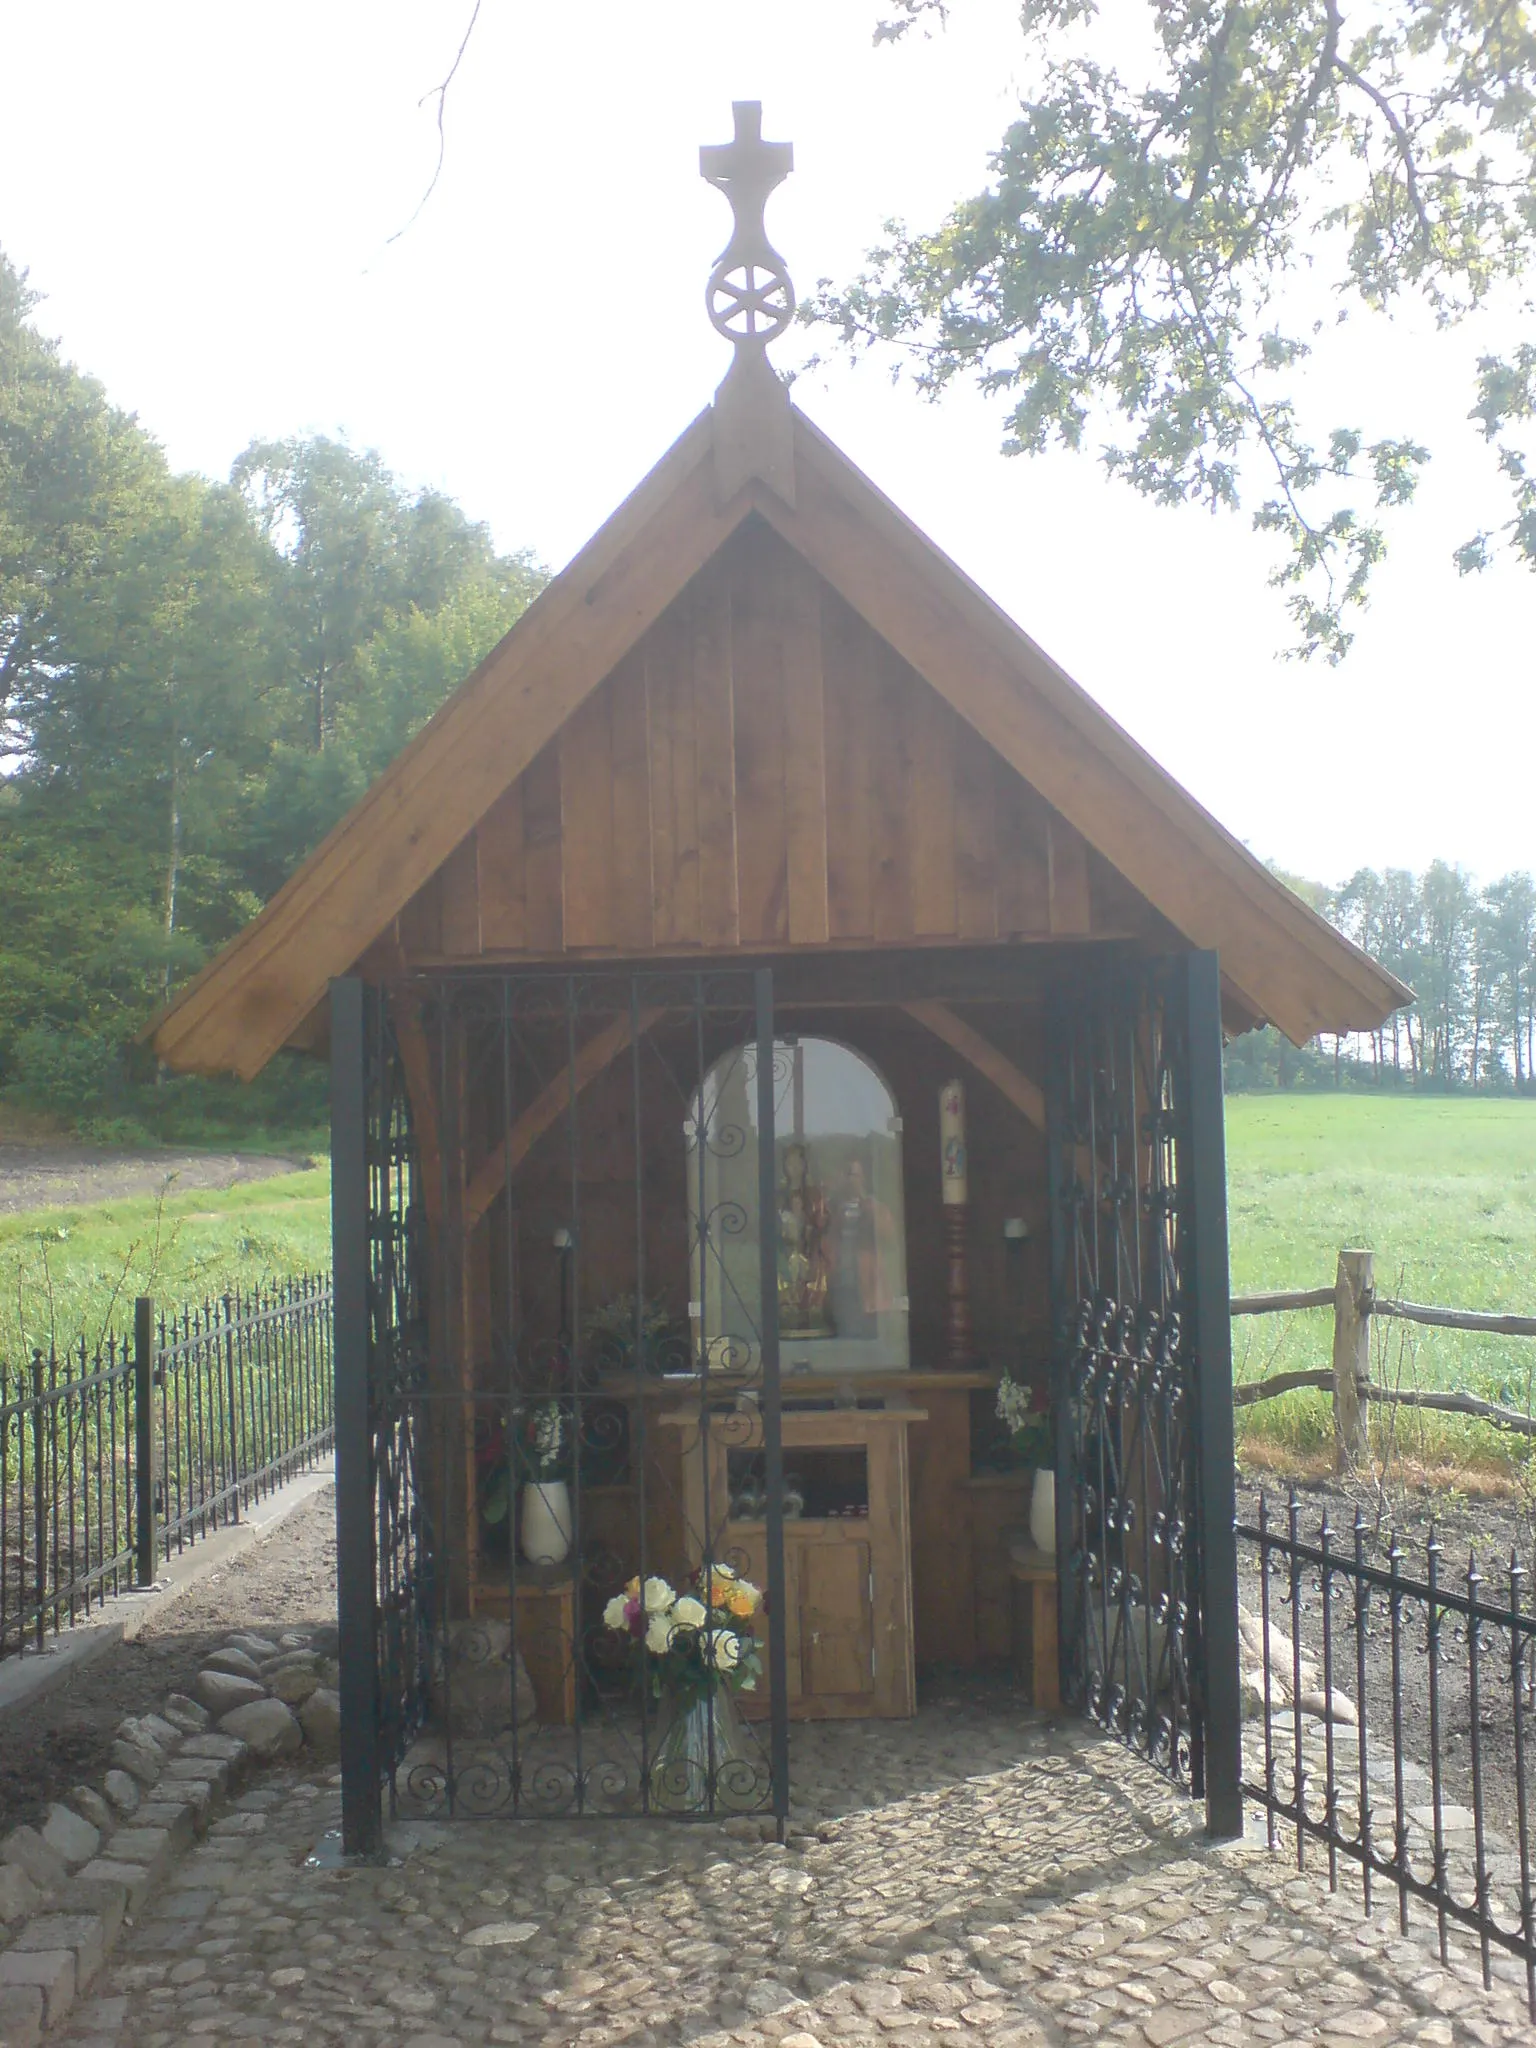 Photo showing: Chapel of Our Lady of Succour at the hill De Hulpe (The Help) near the village of Markelo, region of Twente, province Overijssel, Kingdom of the Netherlands. Opened May 2009. Before the Protestant Reformation, a miraculous statue of the Blessed Virgin Mary was reported near or at the present site, part of religious life of the village. In the context of the Cultural Religious Heritage Tour around Markelo, the chapel and site were restored.